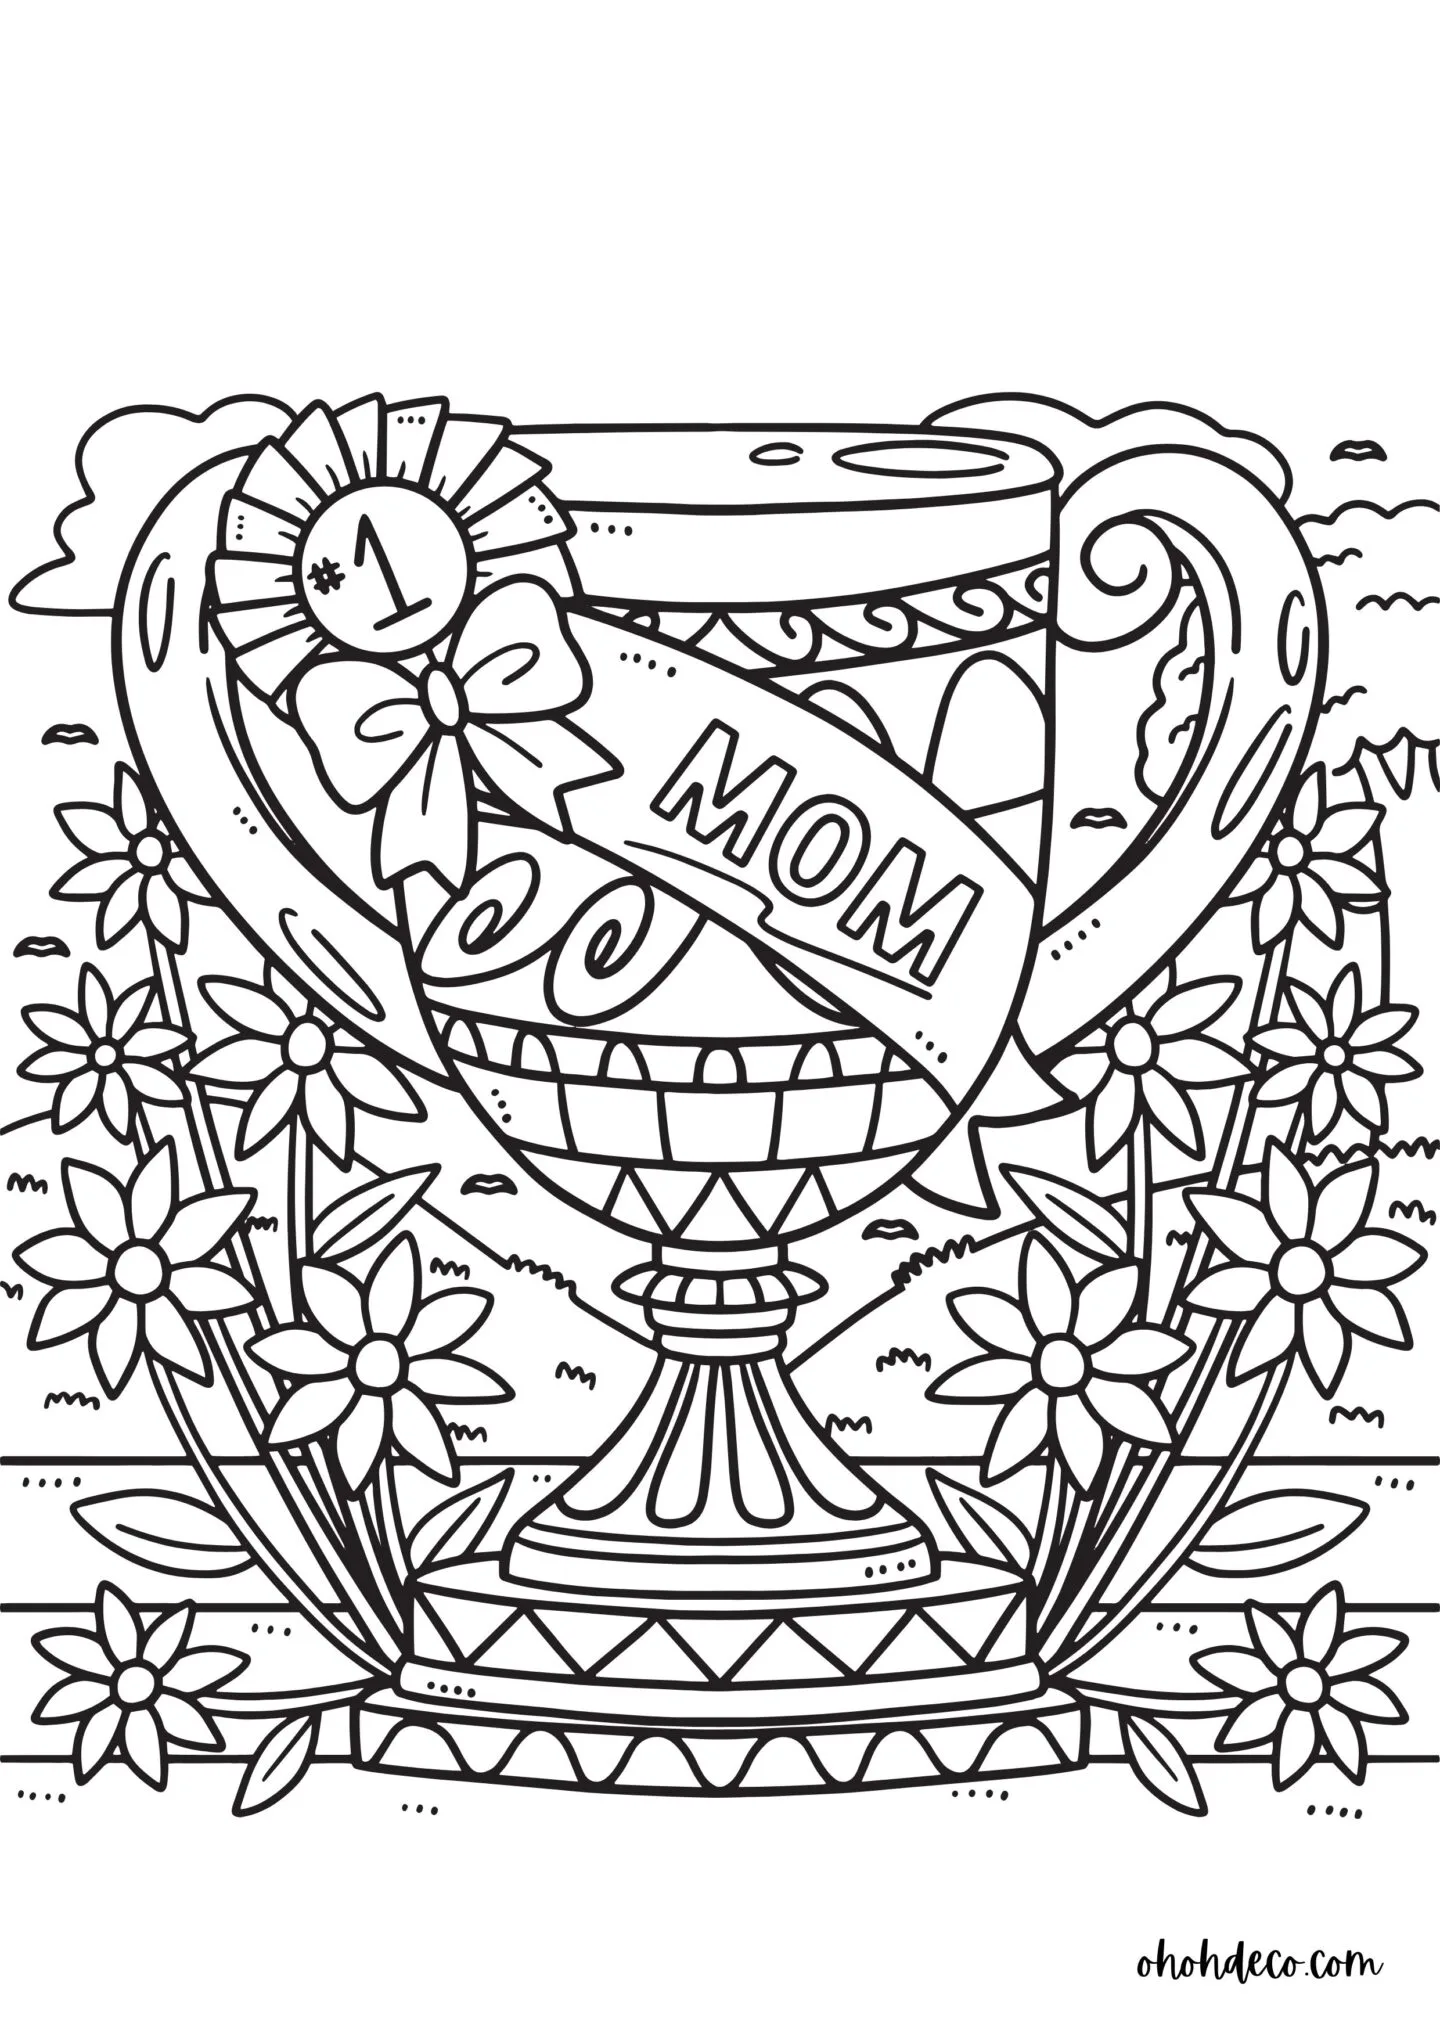 best mom coloring page